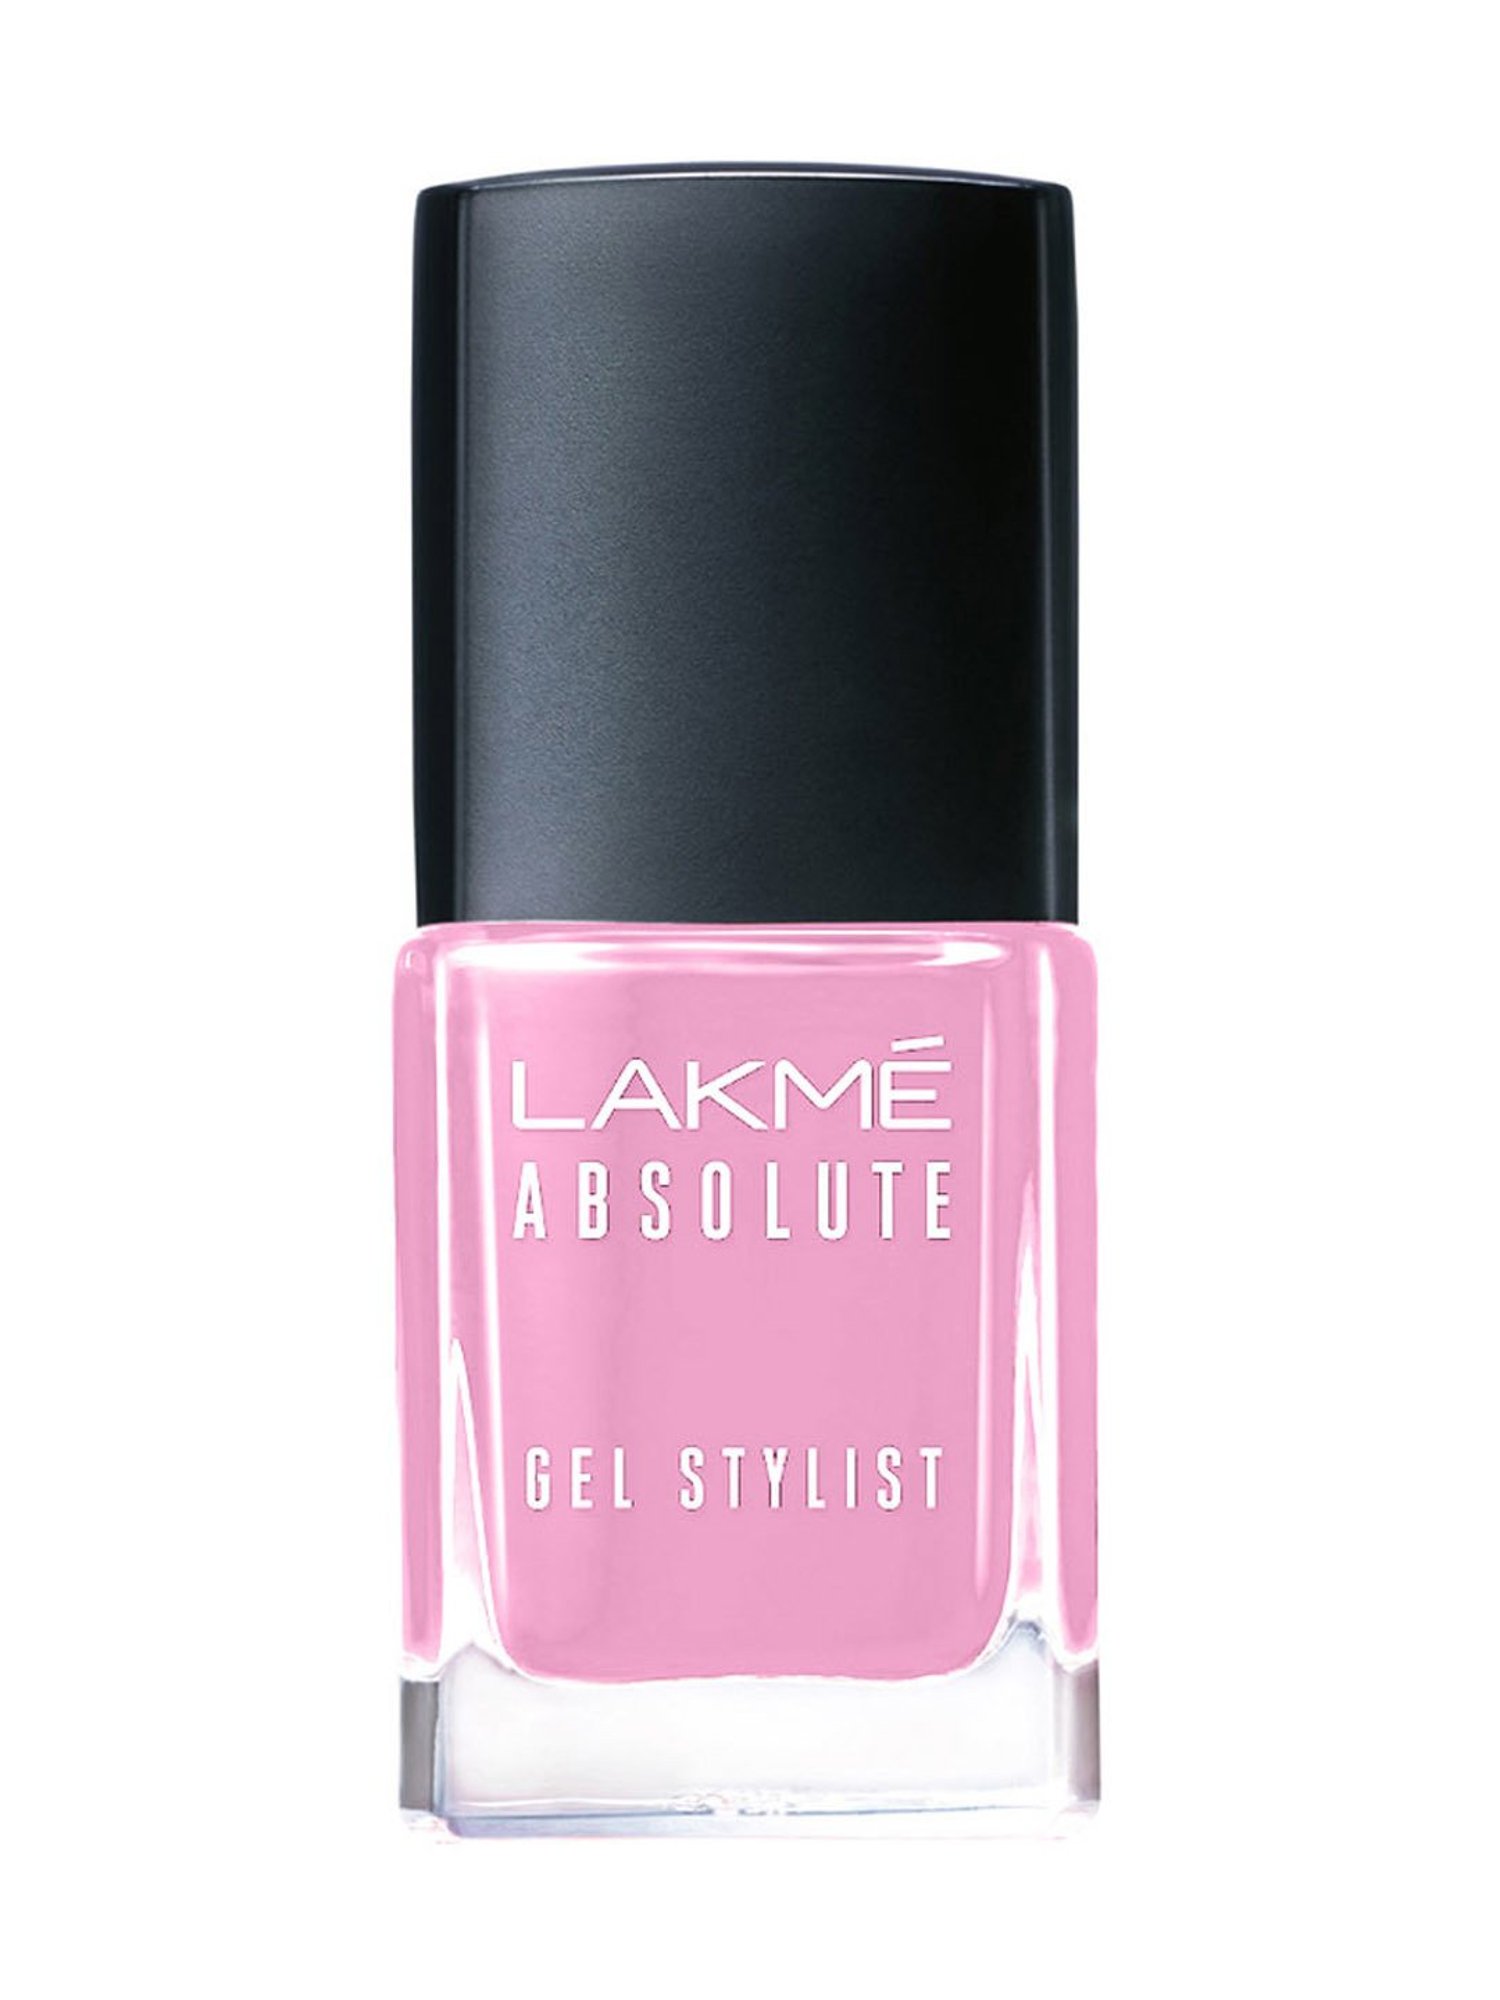 I Love Lakme - Set your mood right with a double dose of sparkle  tonight😉✨​ Ft. Absolute Gel Stylist Nail Color in:​ 💅Trinket​ 💅Fearless​  ​🛒 on https://lakmeindia.com/products/lakme-absolute-gel-stylist?variant=34209405730951  https://lakmeindia ...